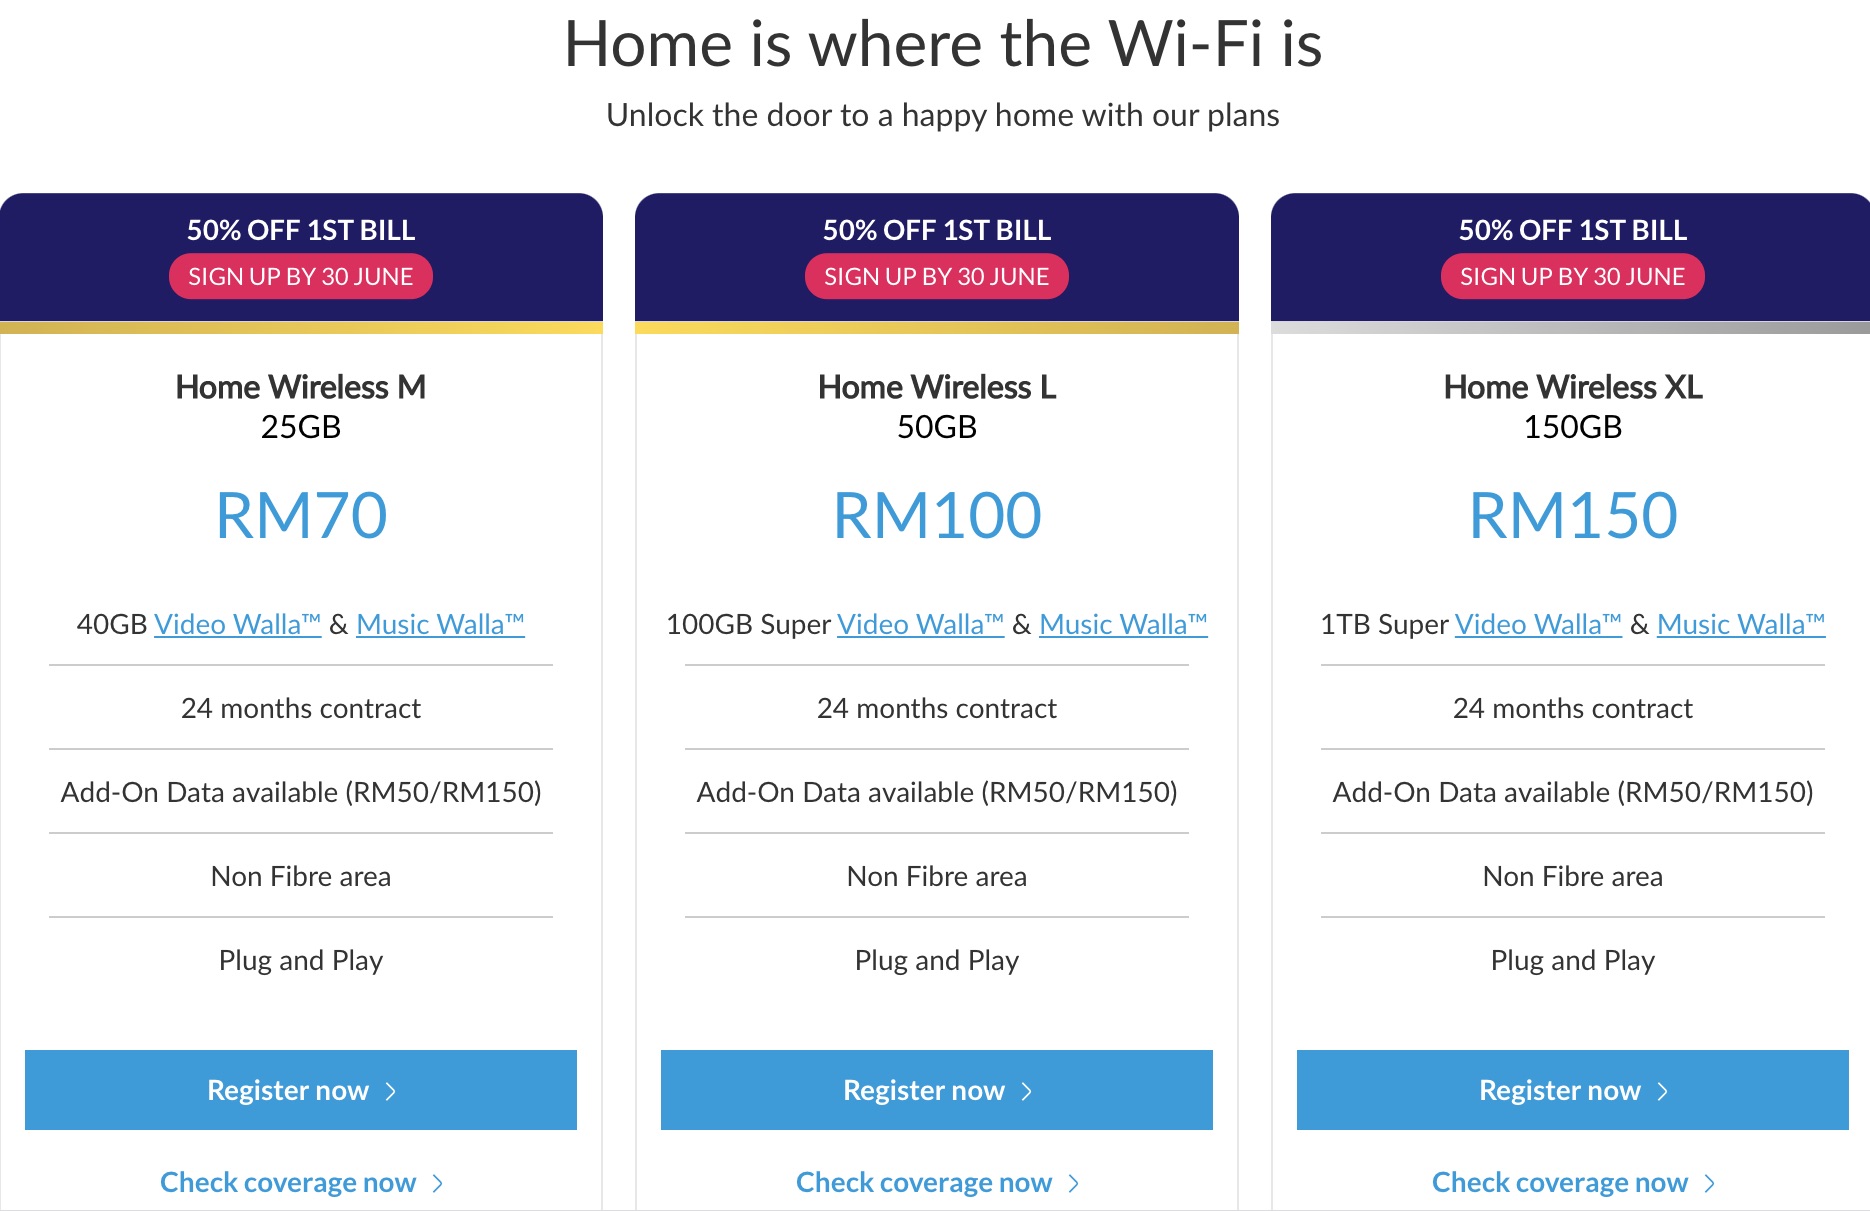 Celcom Offers Home Wireless Broadband From Rm35 For The First Month